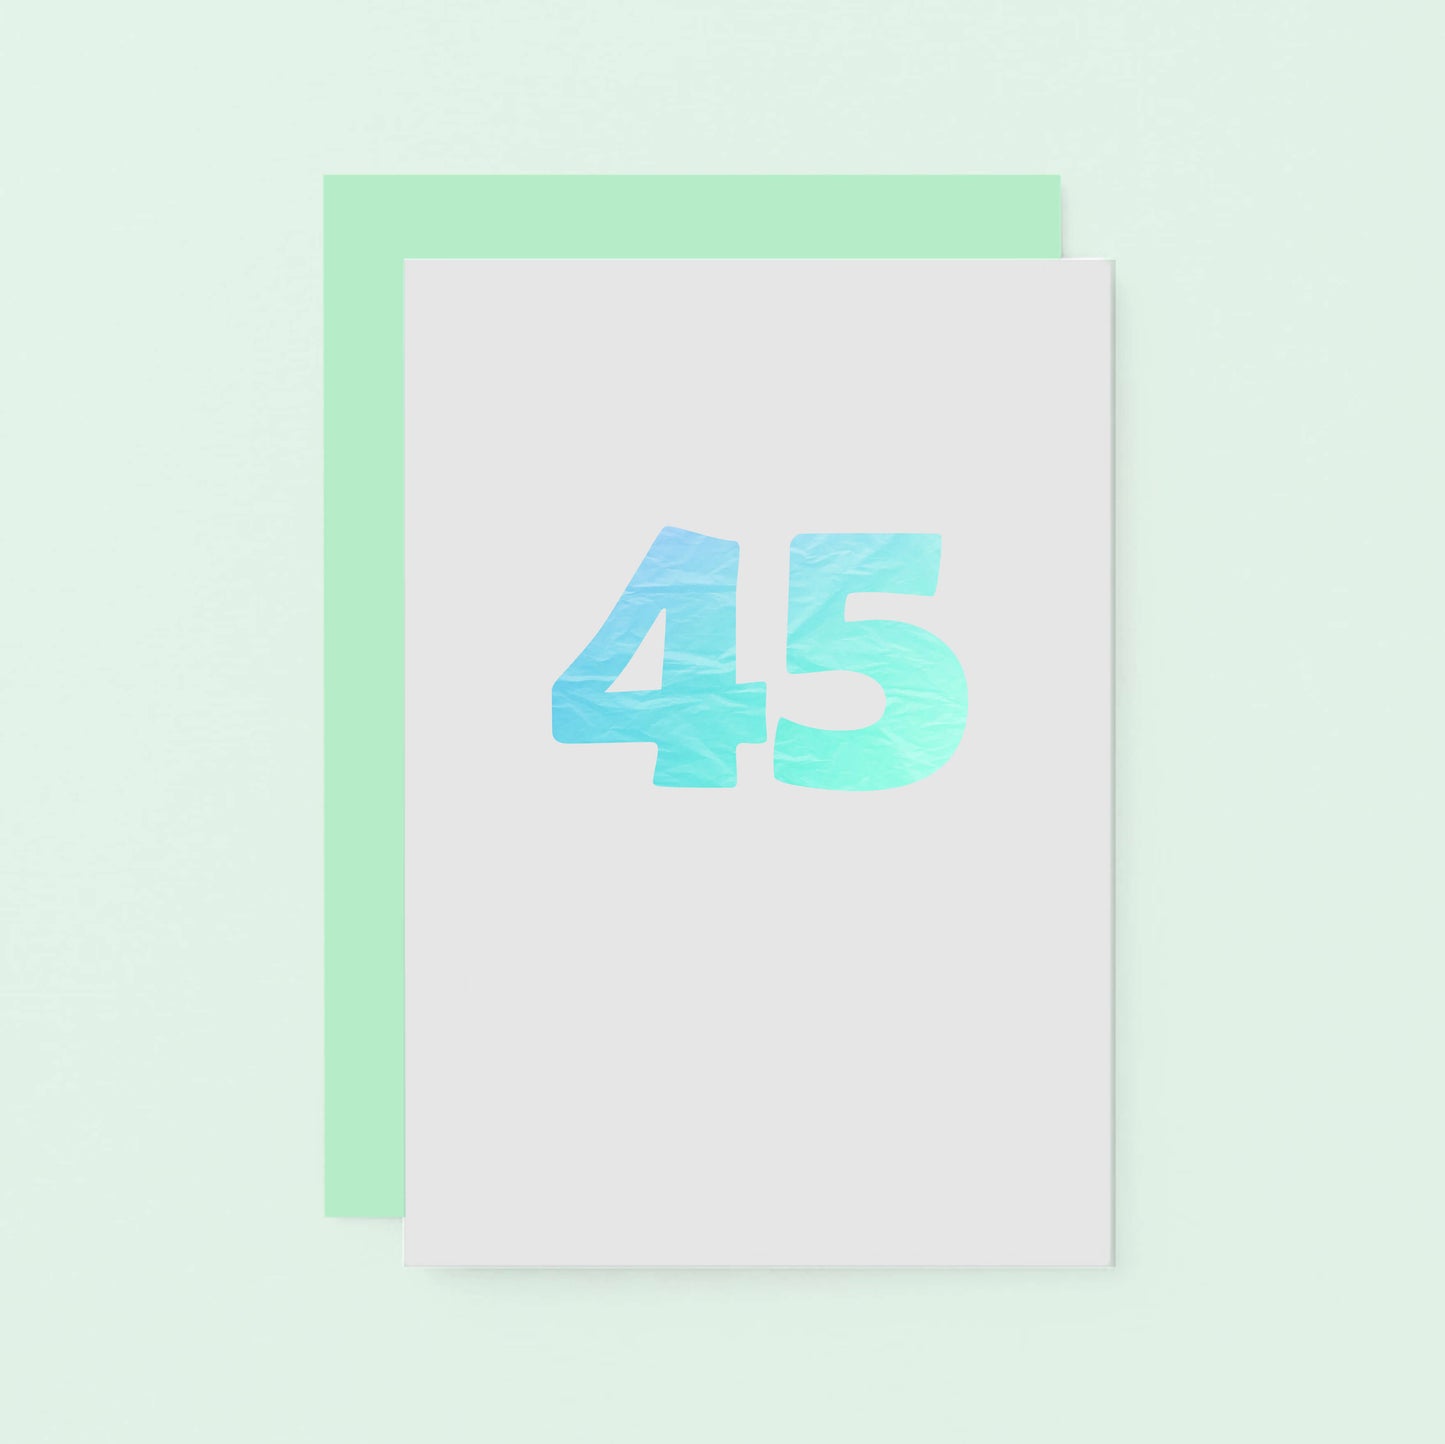 45 Years Card by SixElevenCreations. Product Code SE4055A6